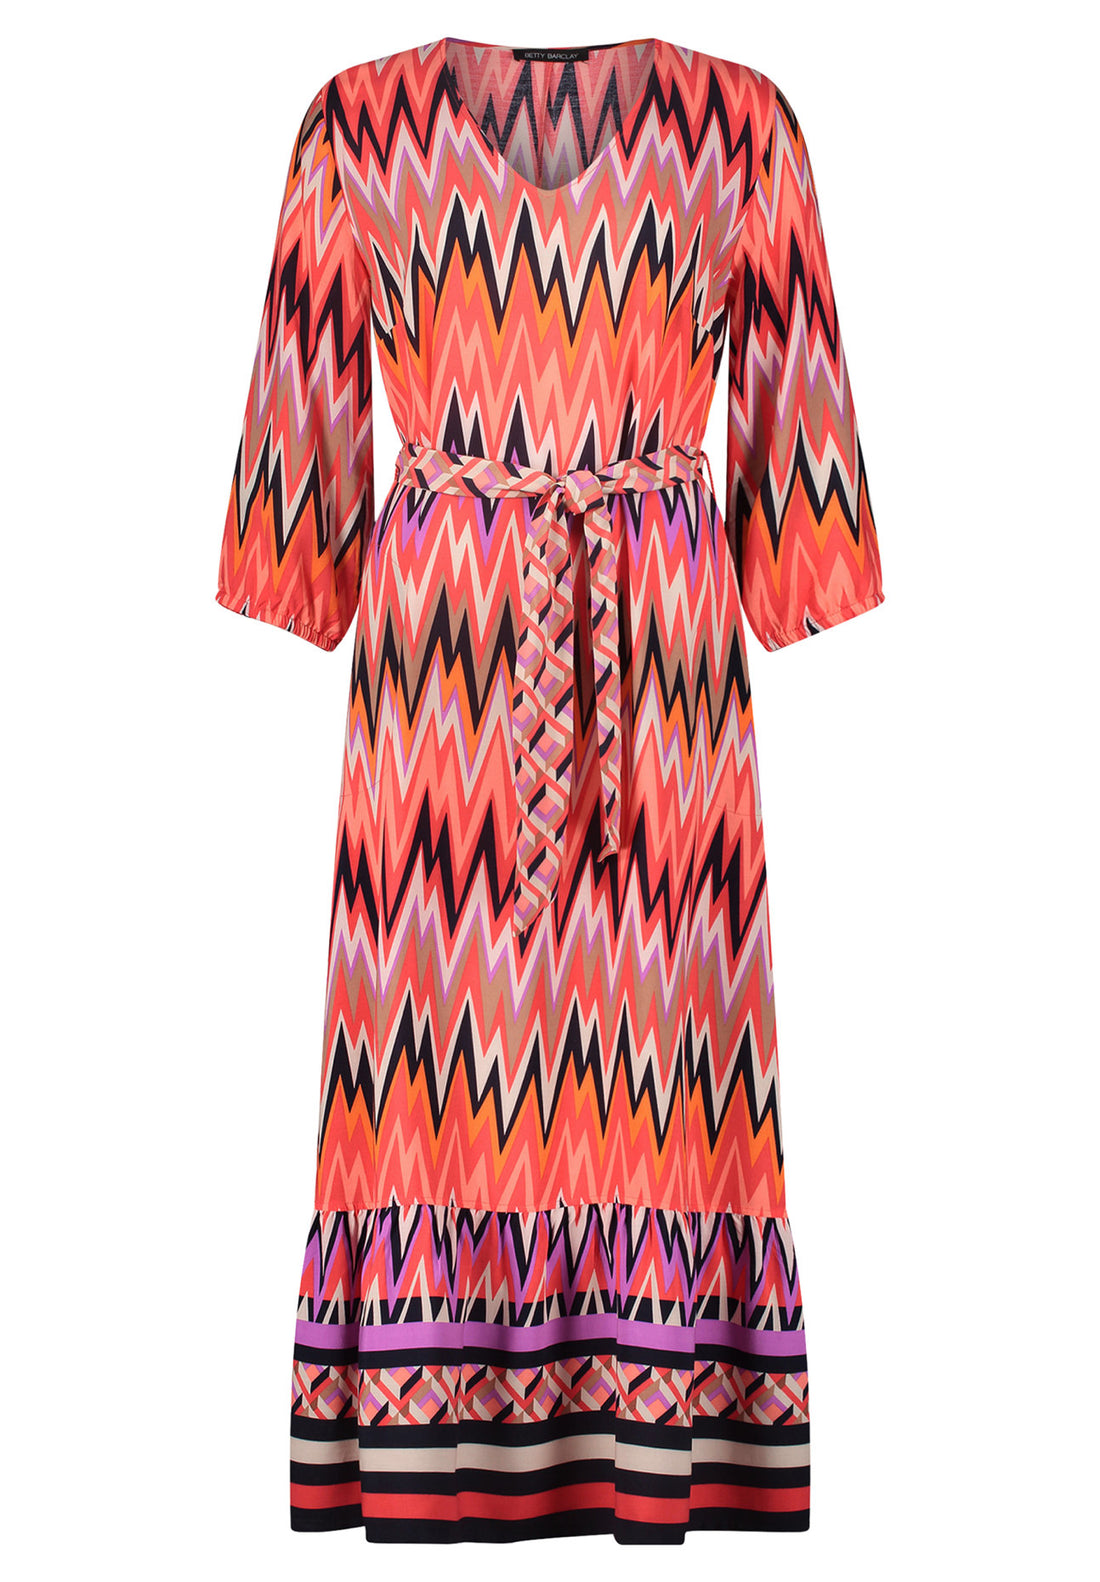 Printed Casual Midi Dress With 3/4 Sleeves_1532 2515_4868_01